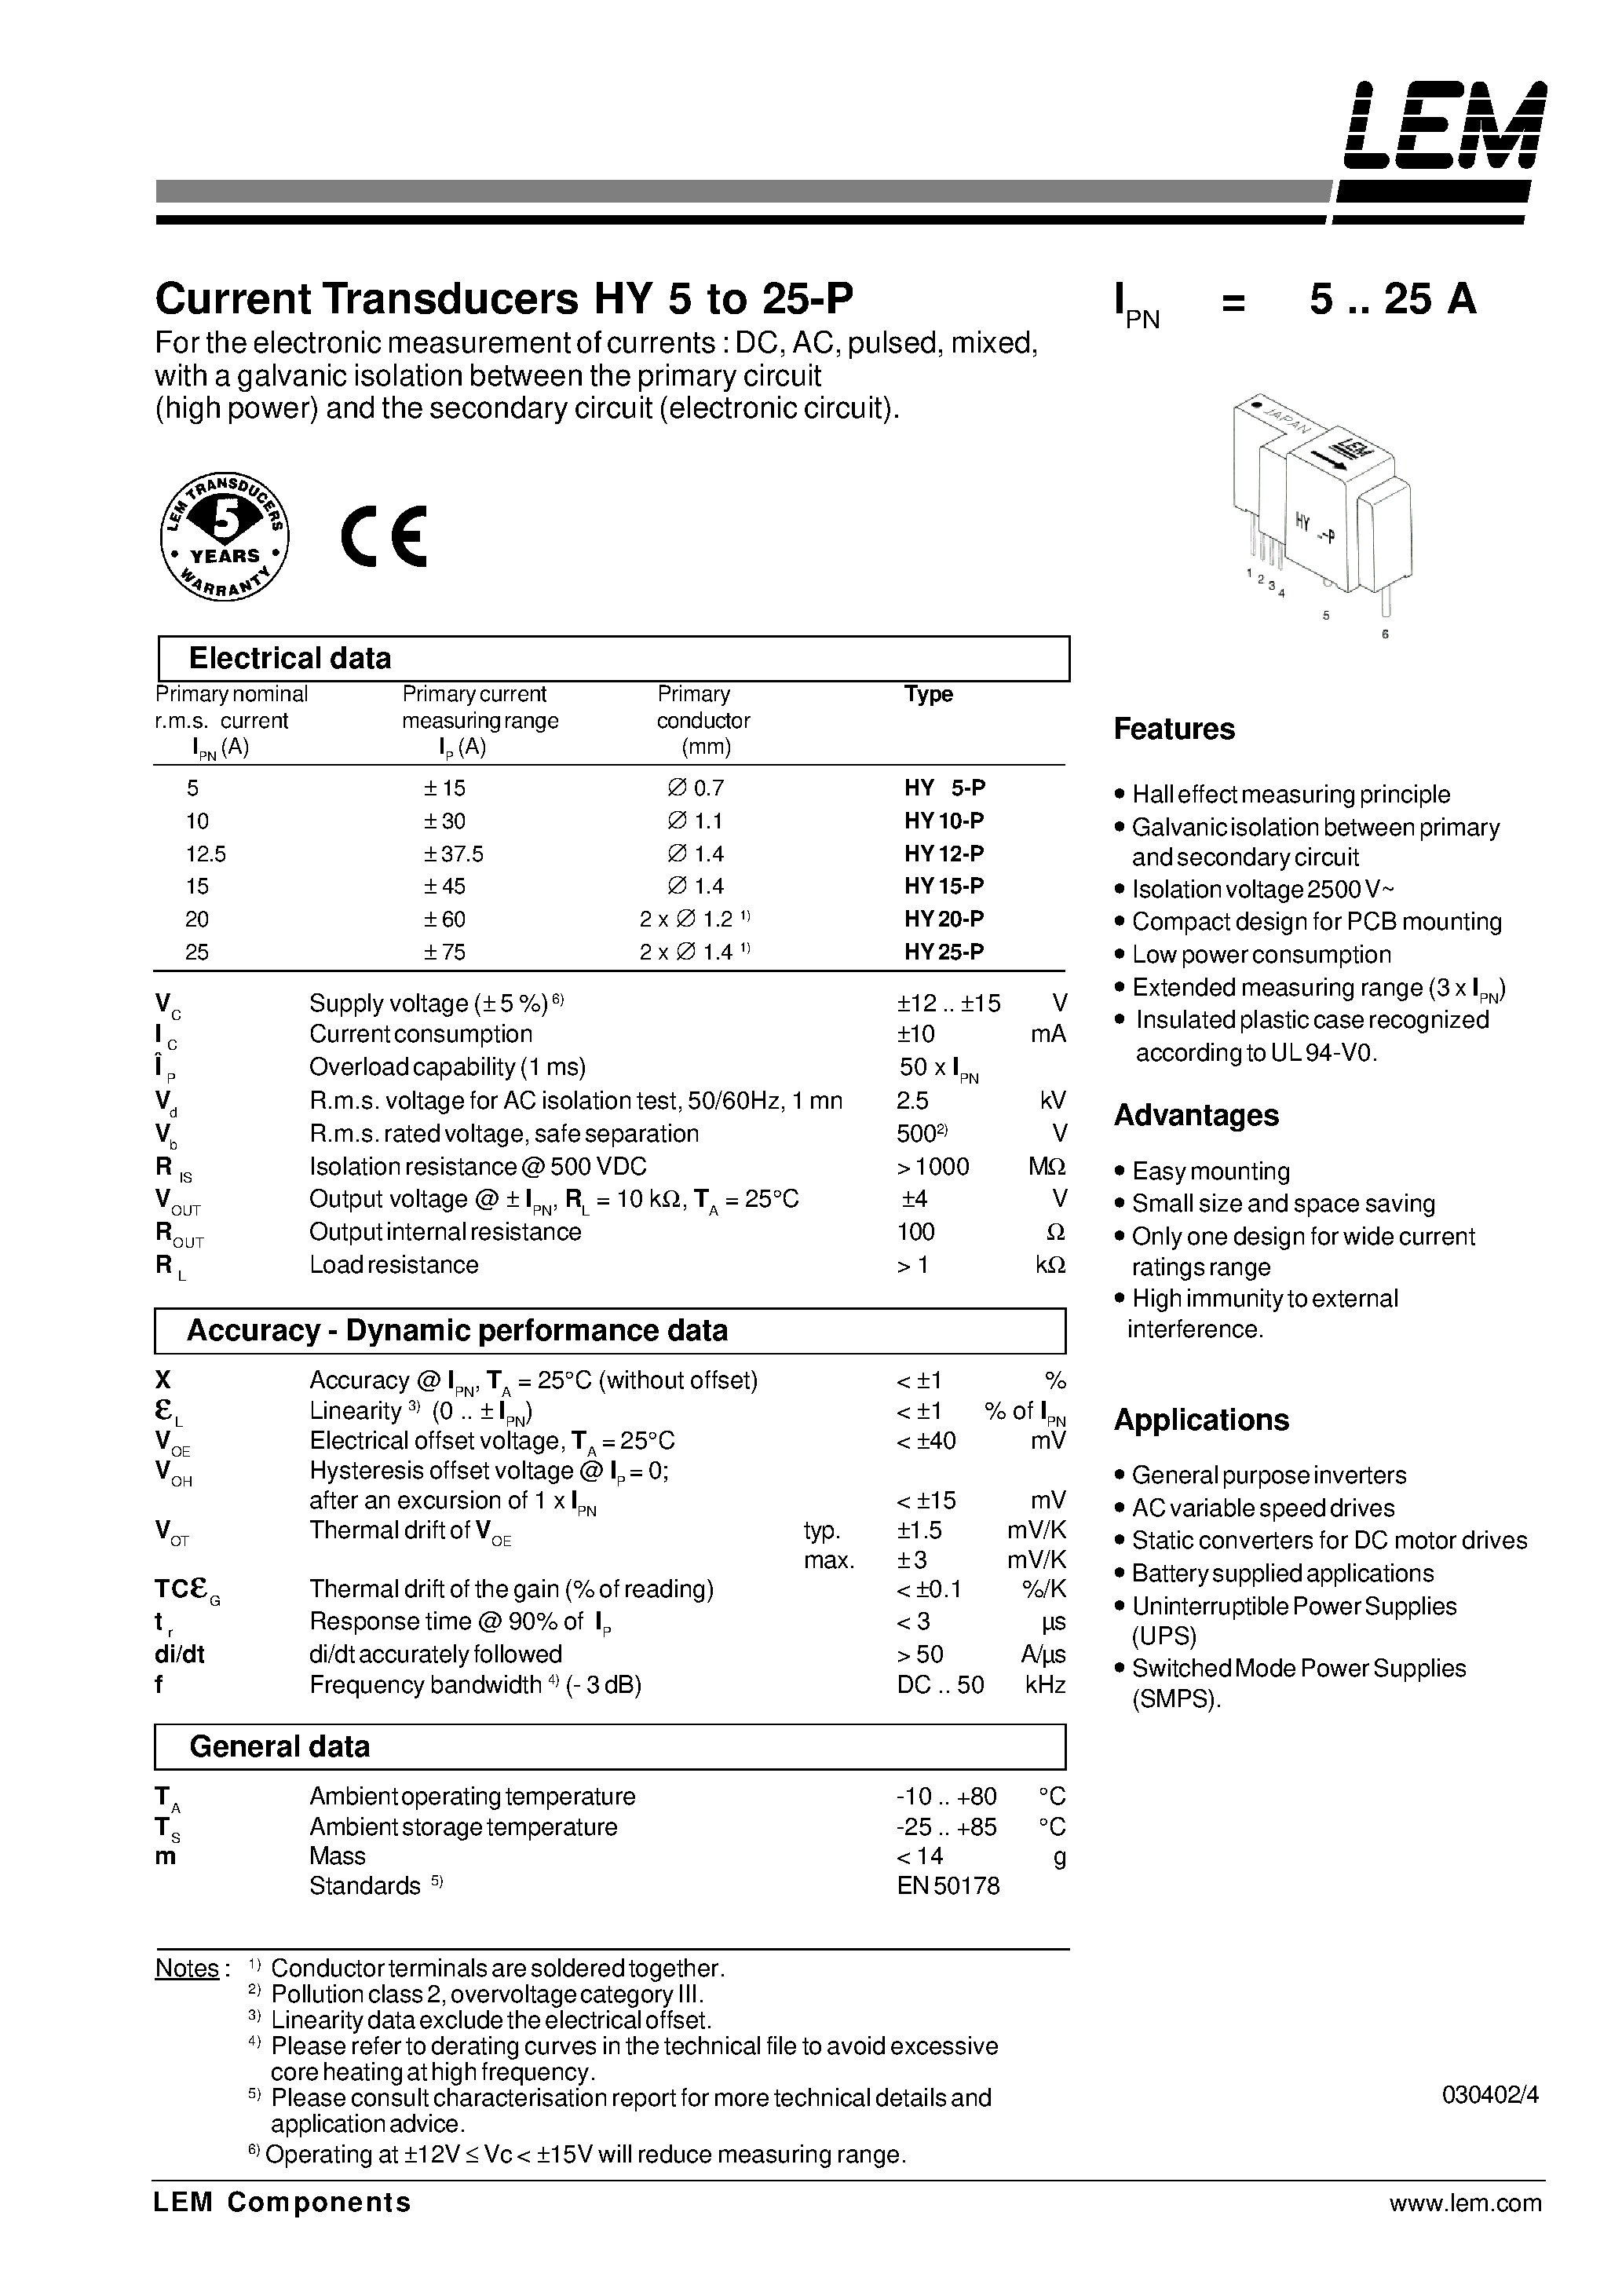 Datasheet HY15-P - Current Transducers HY 5 to 25-P page 1